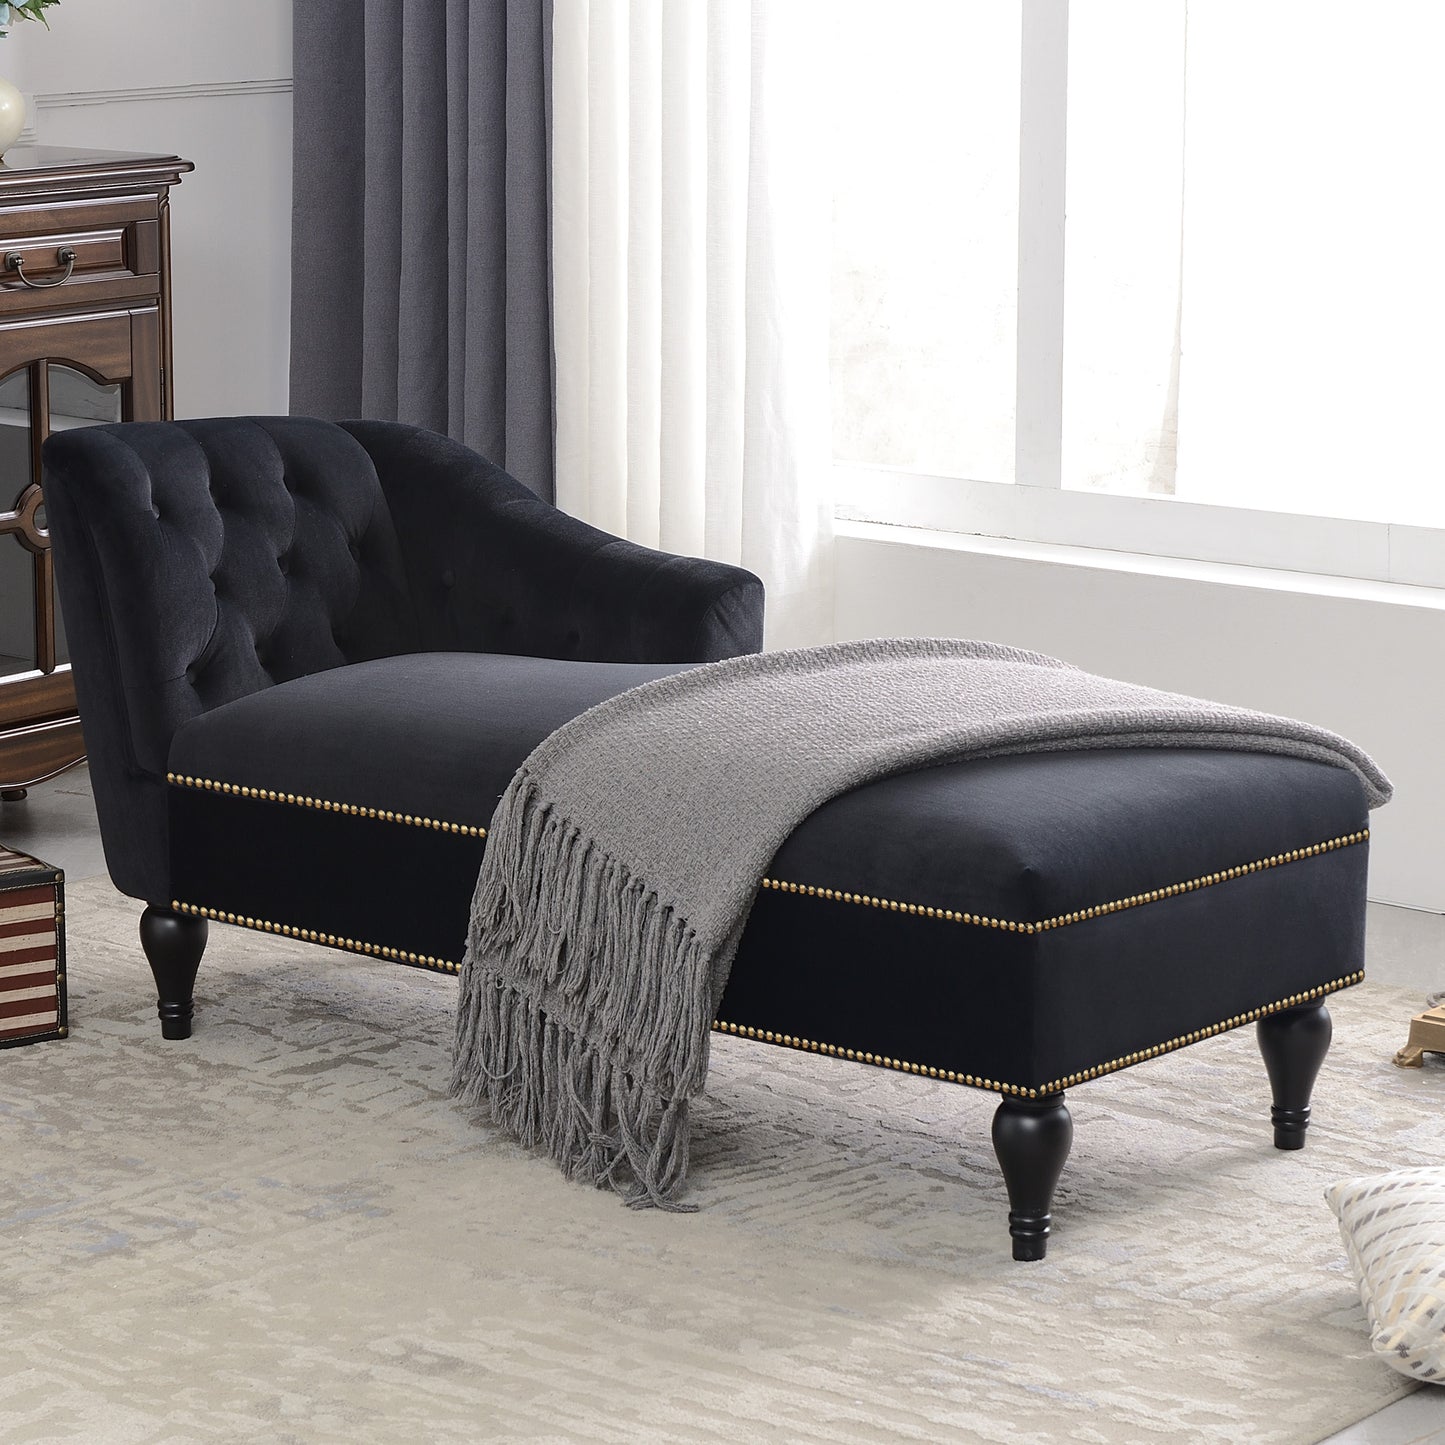 SYNGAR Modern Lounge Chaise Indoor, Leisure Sofa Accent Chair Upholstered Couch, Button Tufted Seat with Matching Accent Pillow, and Solid Wooden Legs